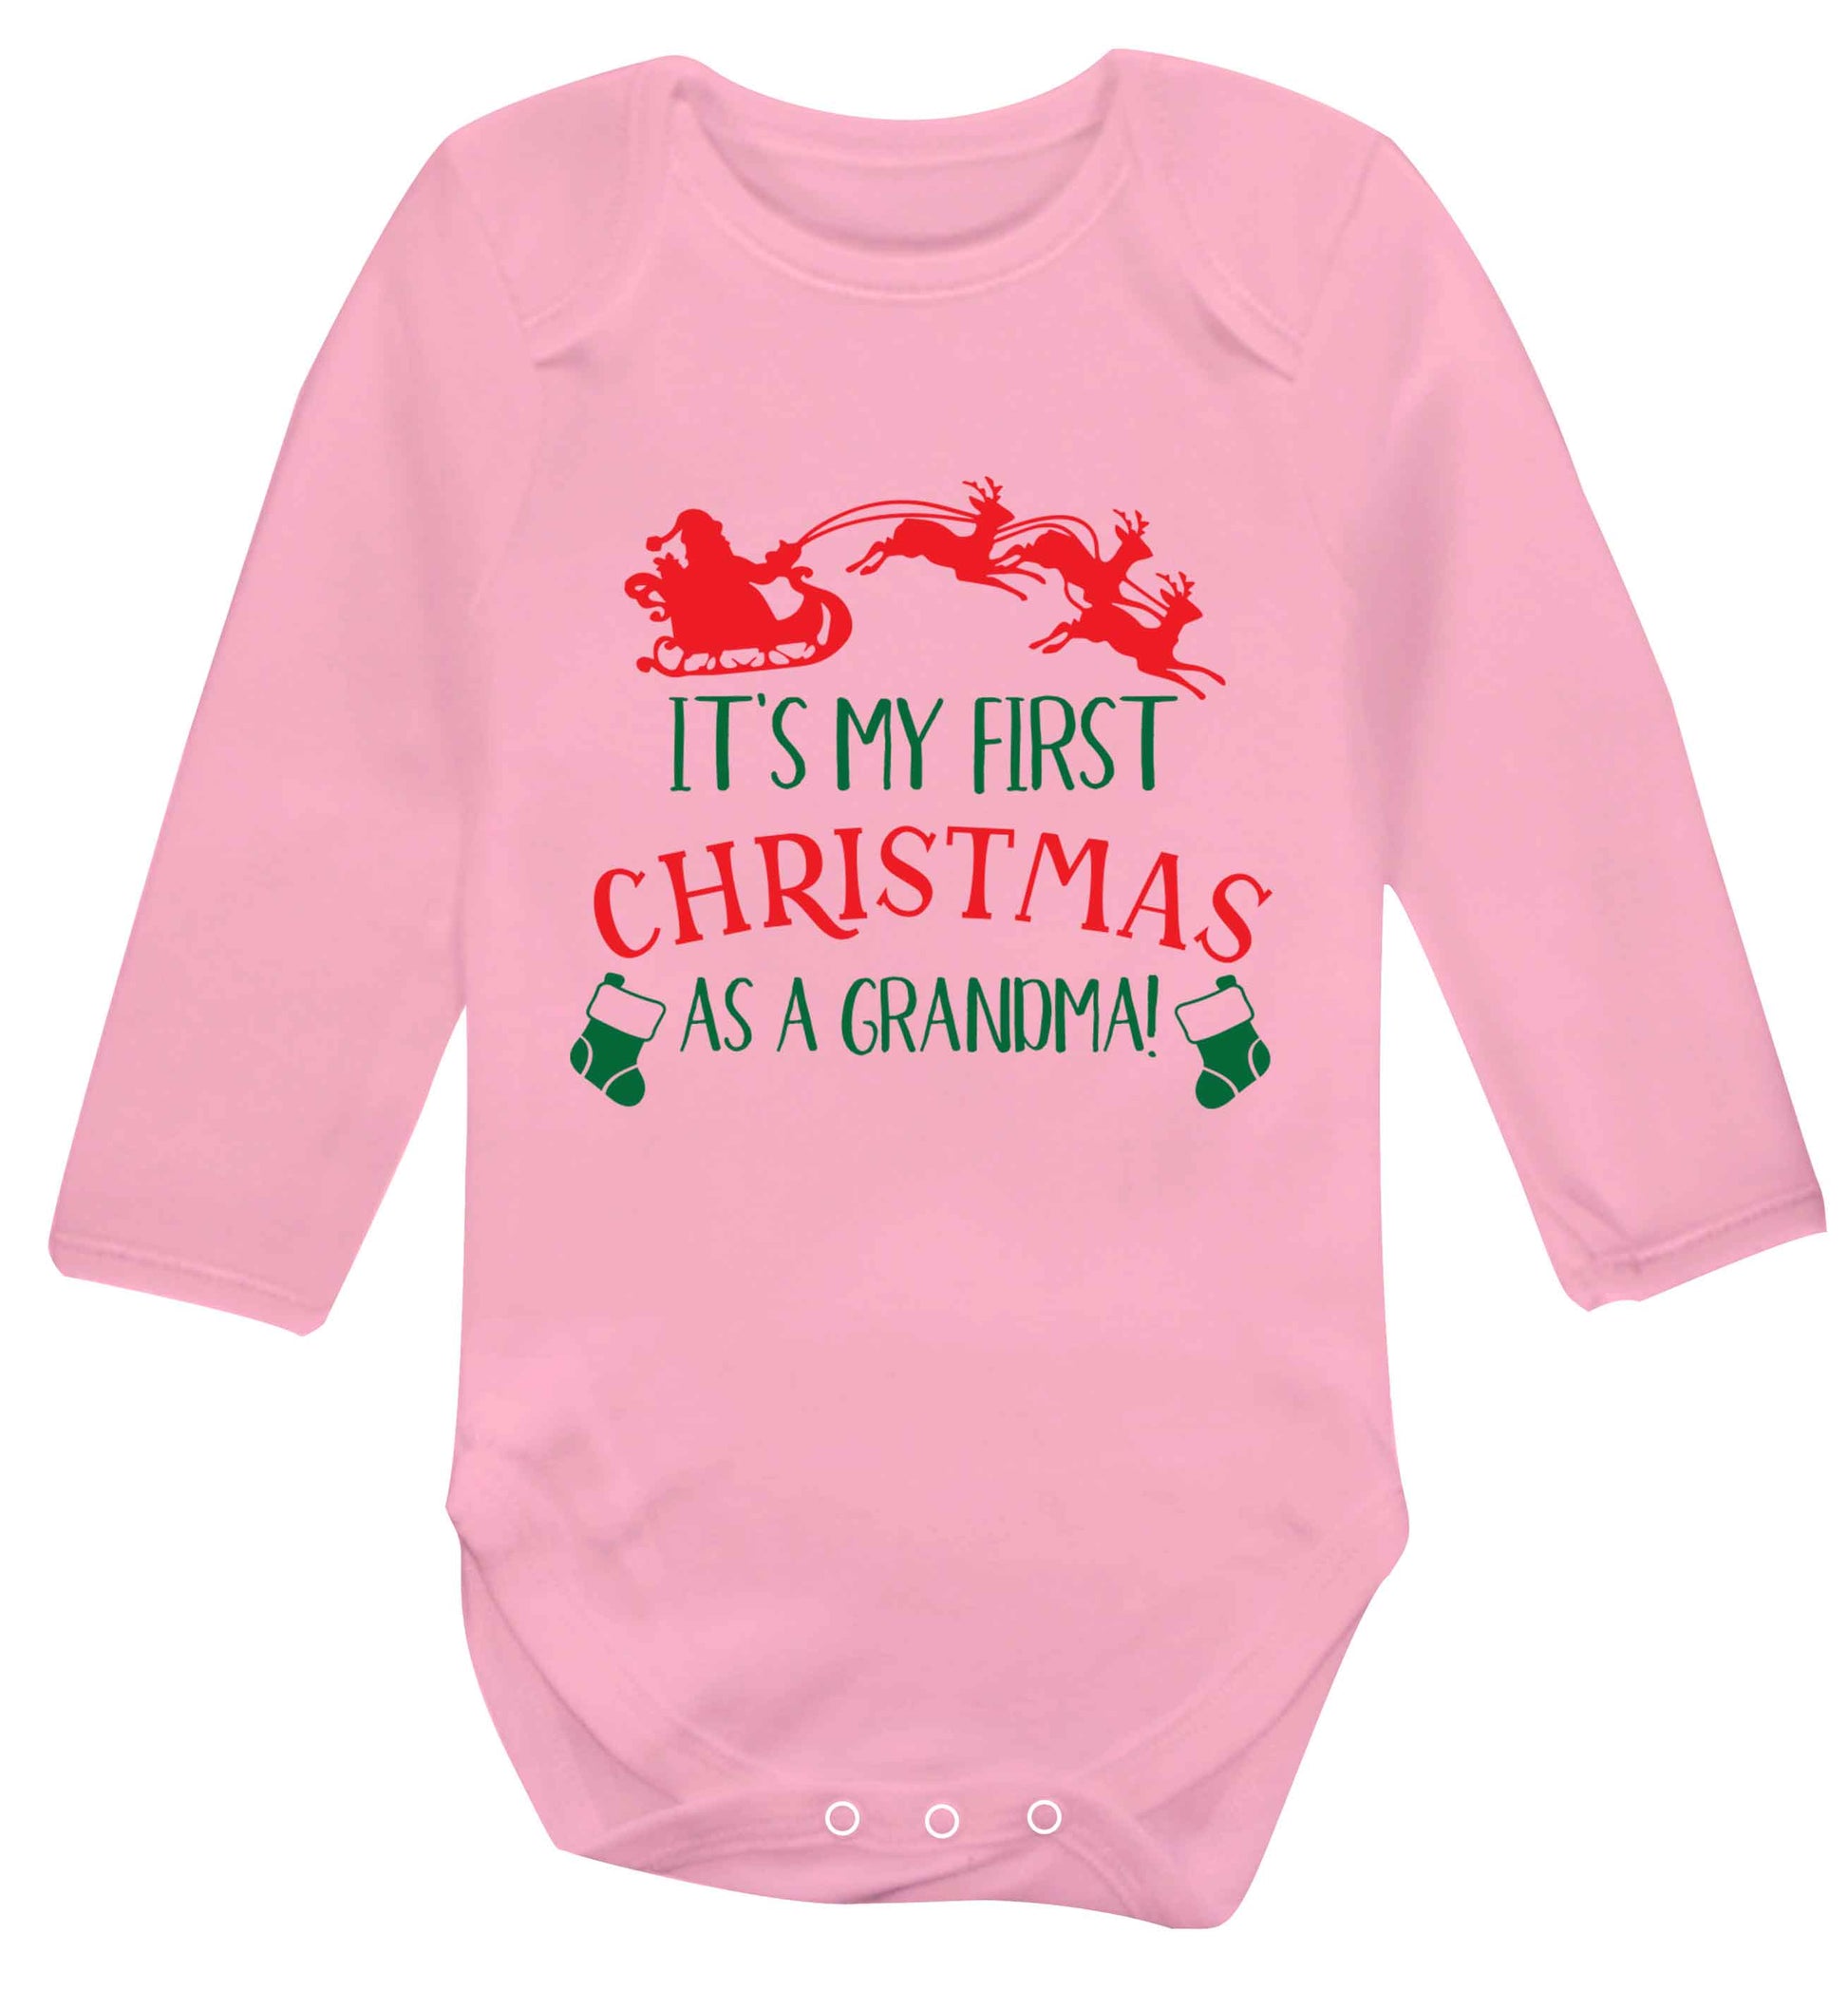 It's my first Christmas as a grandma! Baby Vest long sleeved pale pink 6-12 months